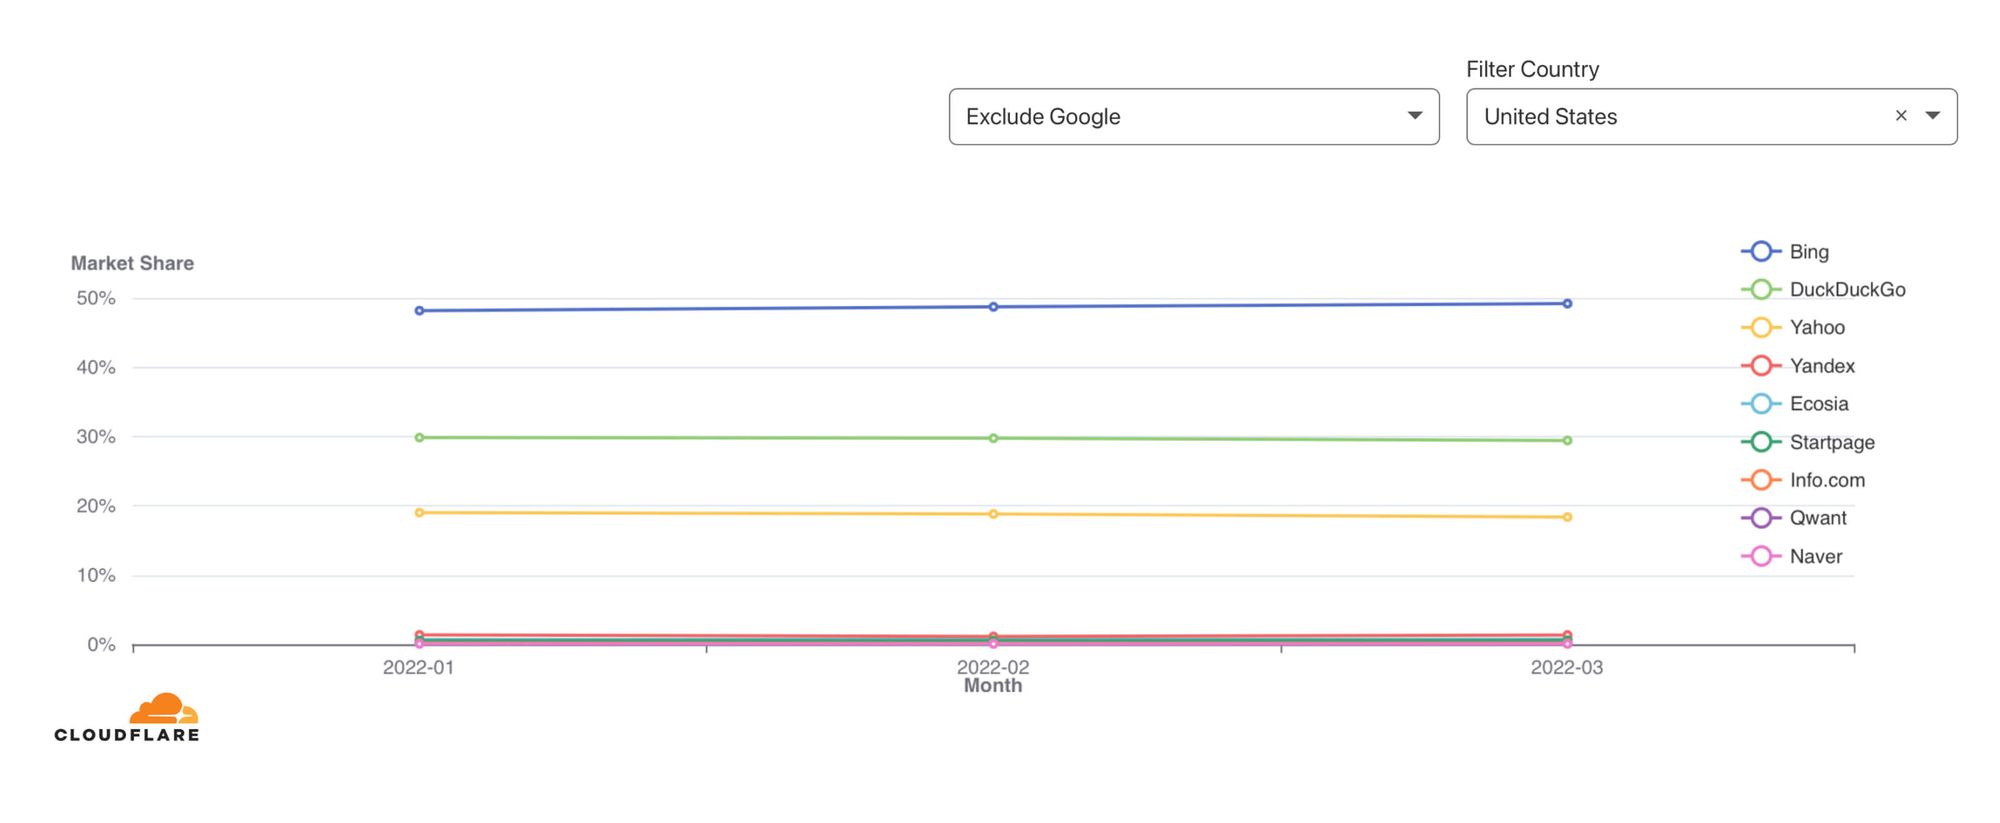 New Search Engine Market Share Data from Cloudflare and Wikipedia